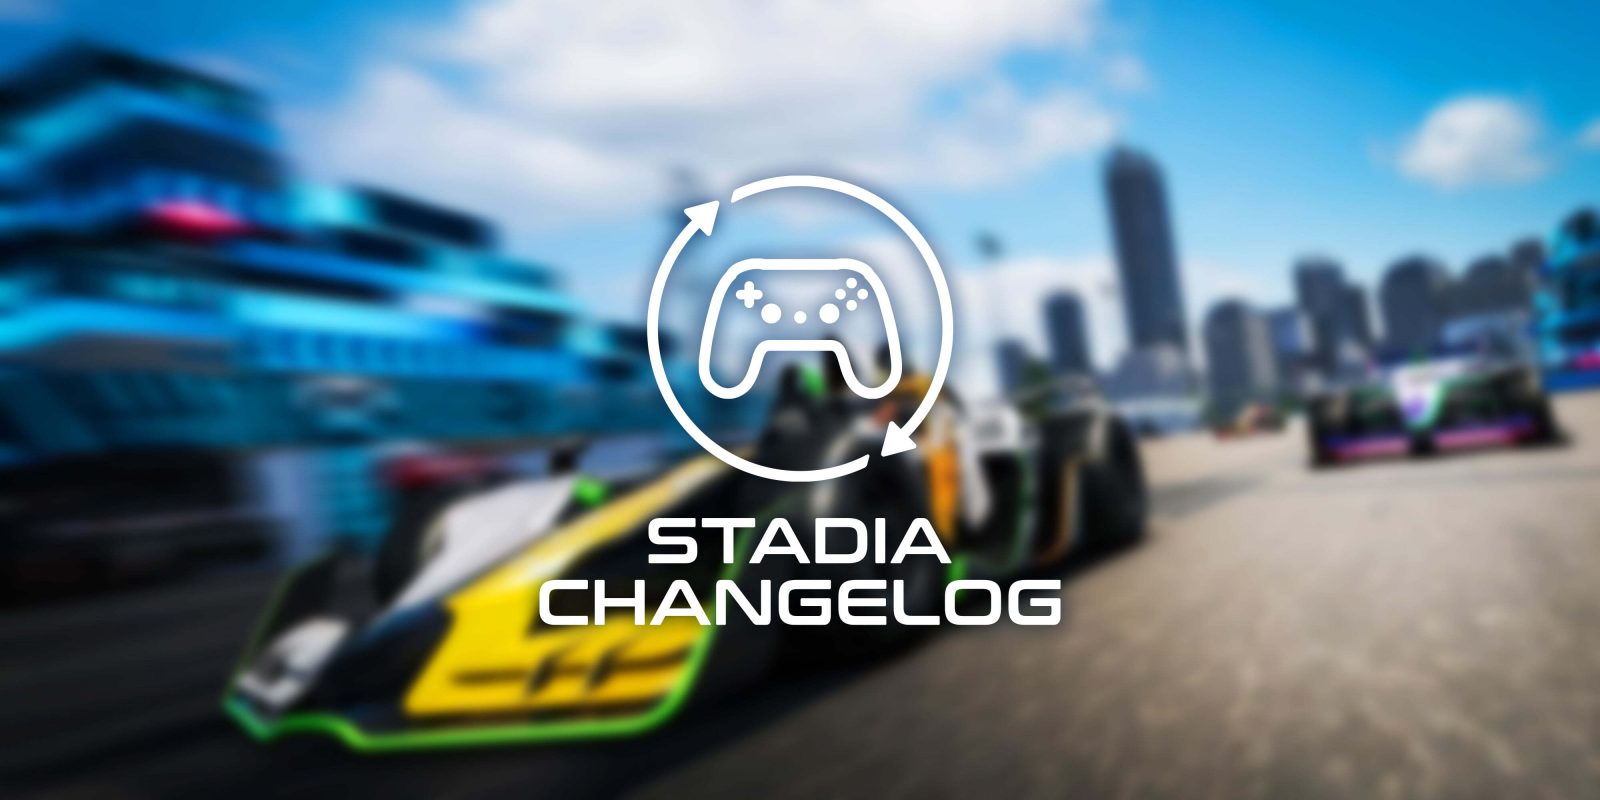 The Crew 2 free on Stadia, Dead by Daylight too - 9to5Google